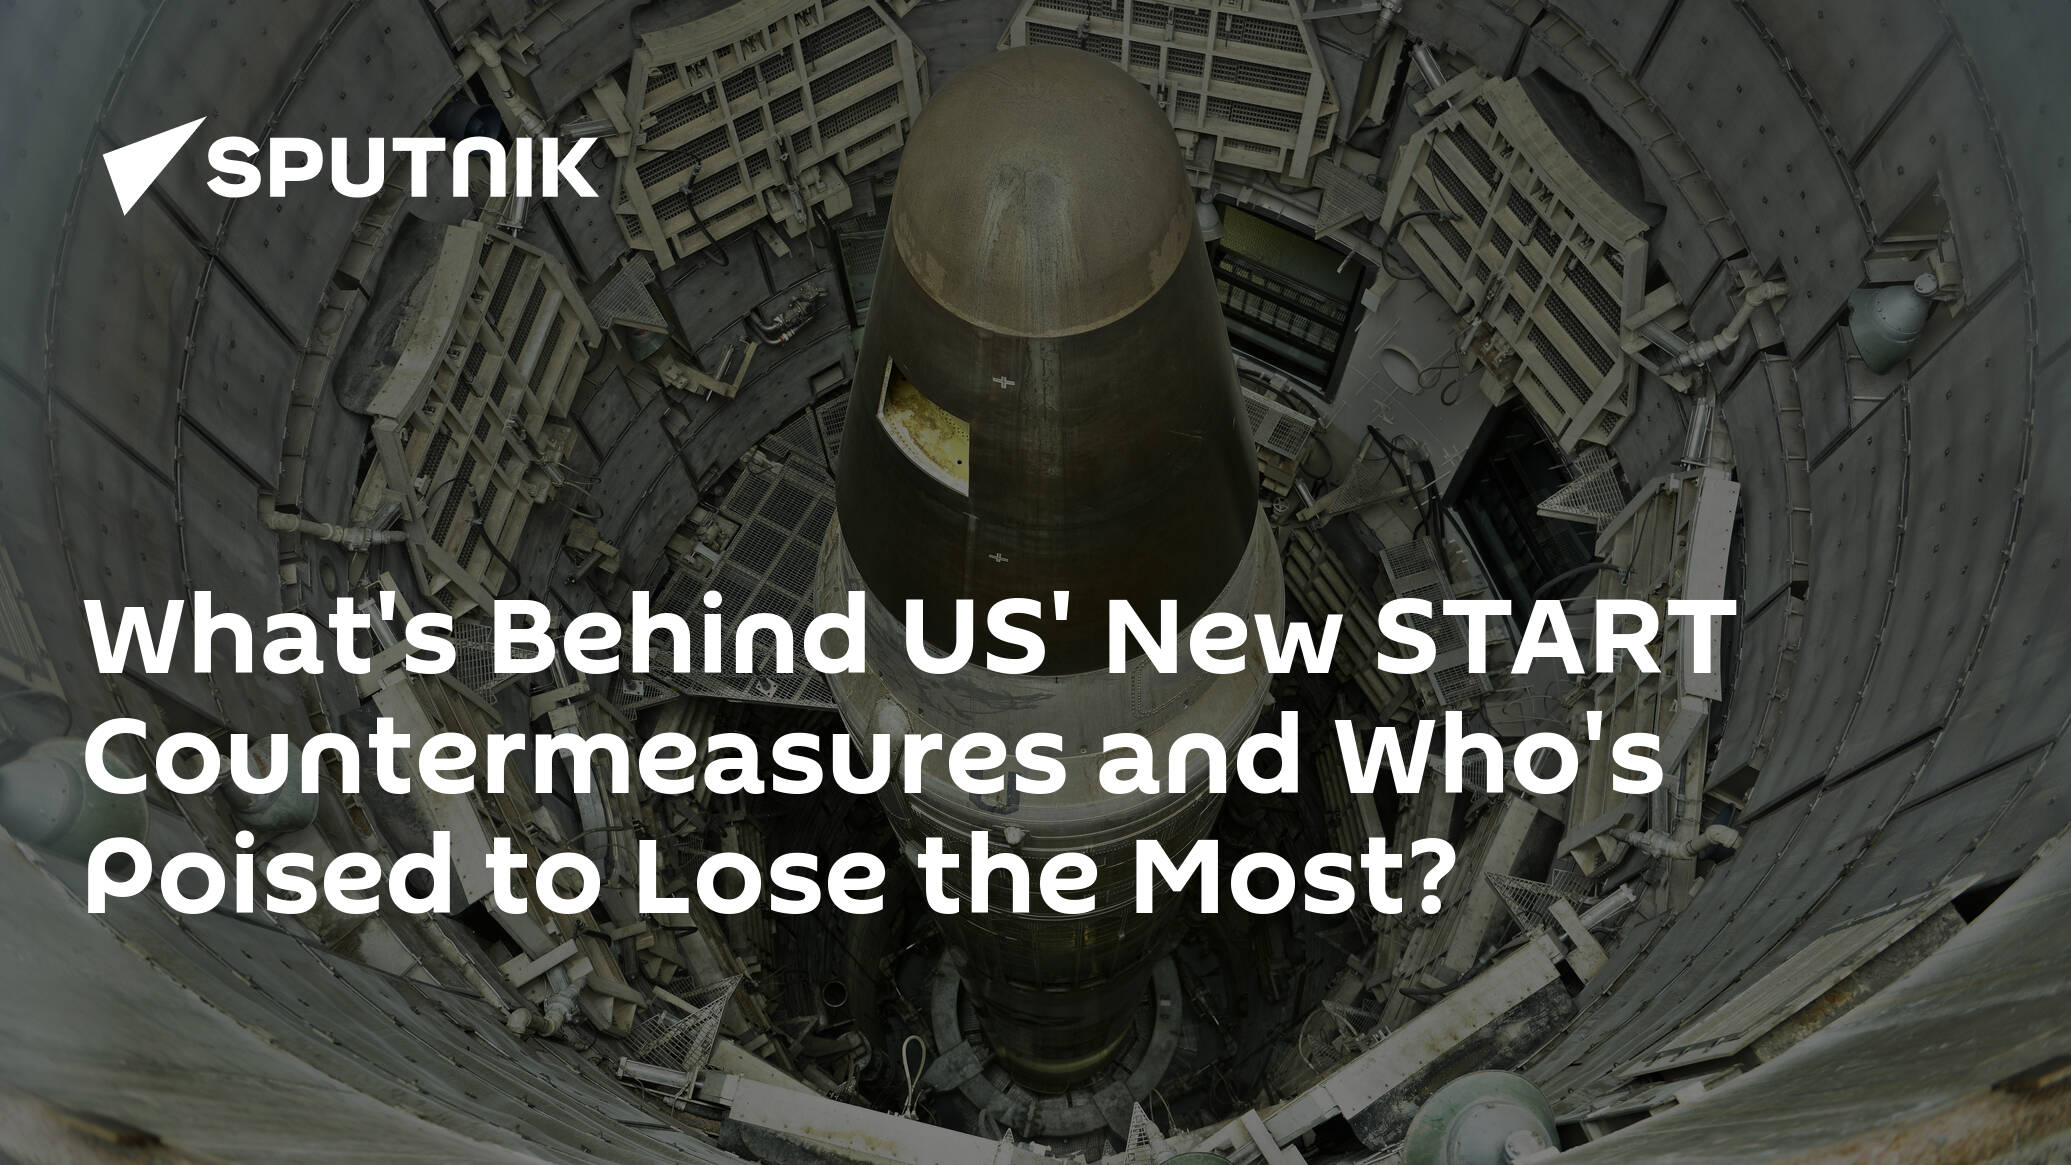 What's Behind US' New START Countermeasures and Who's Poised to Lose the Most?